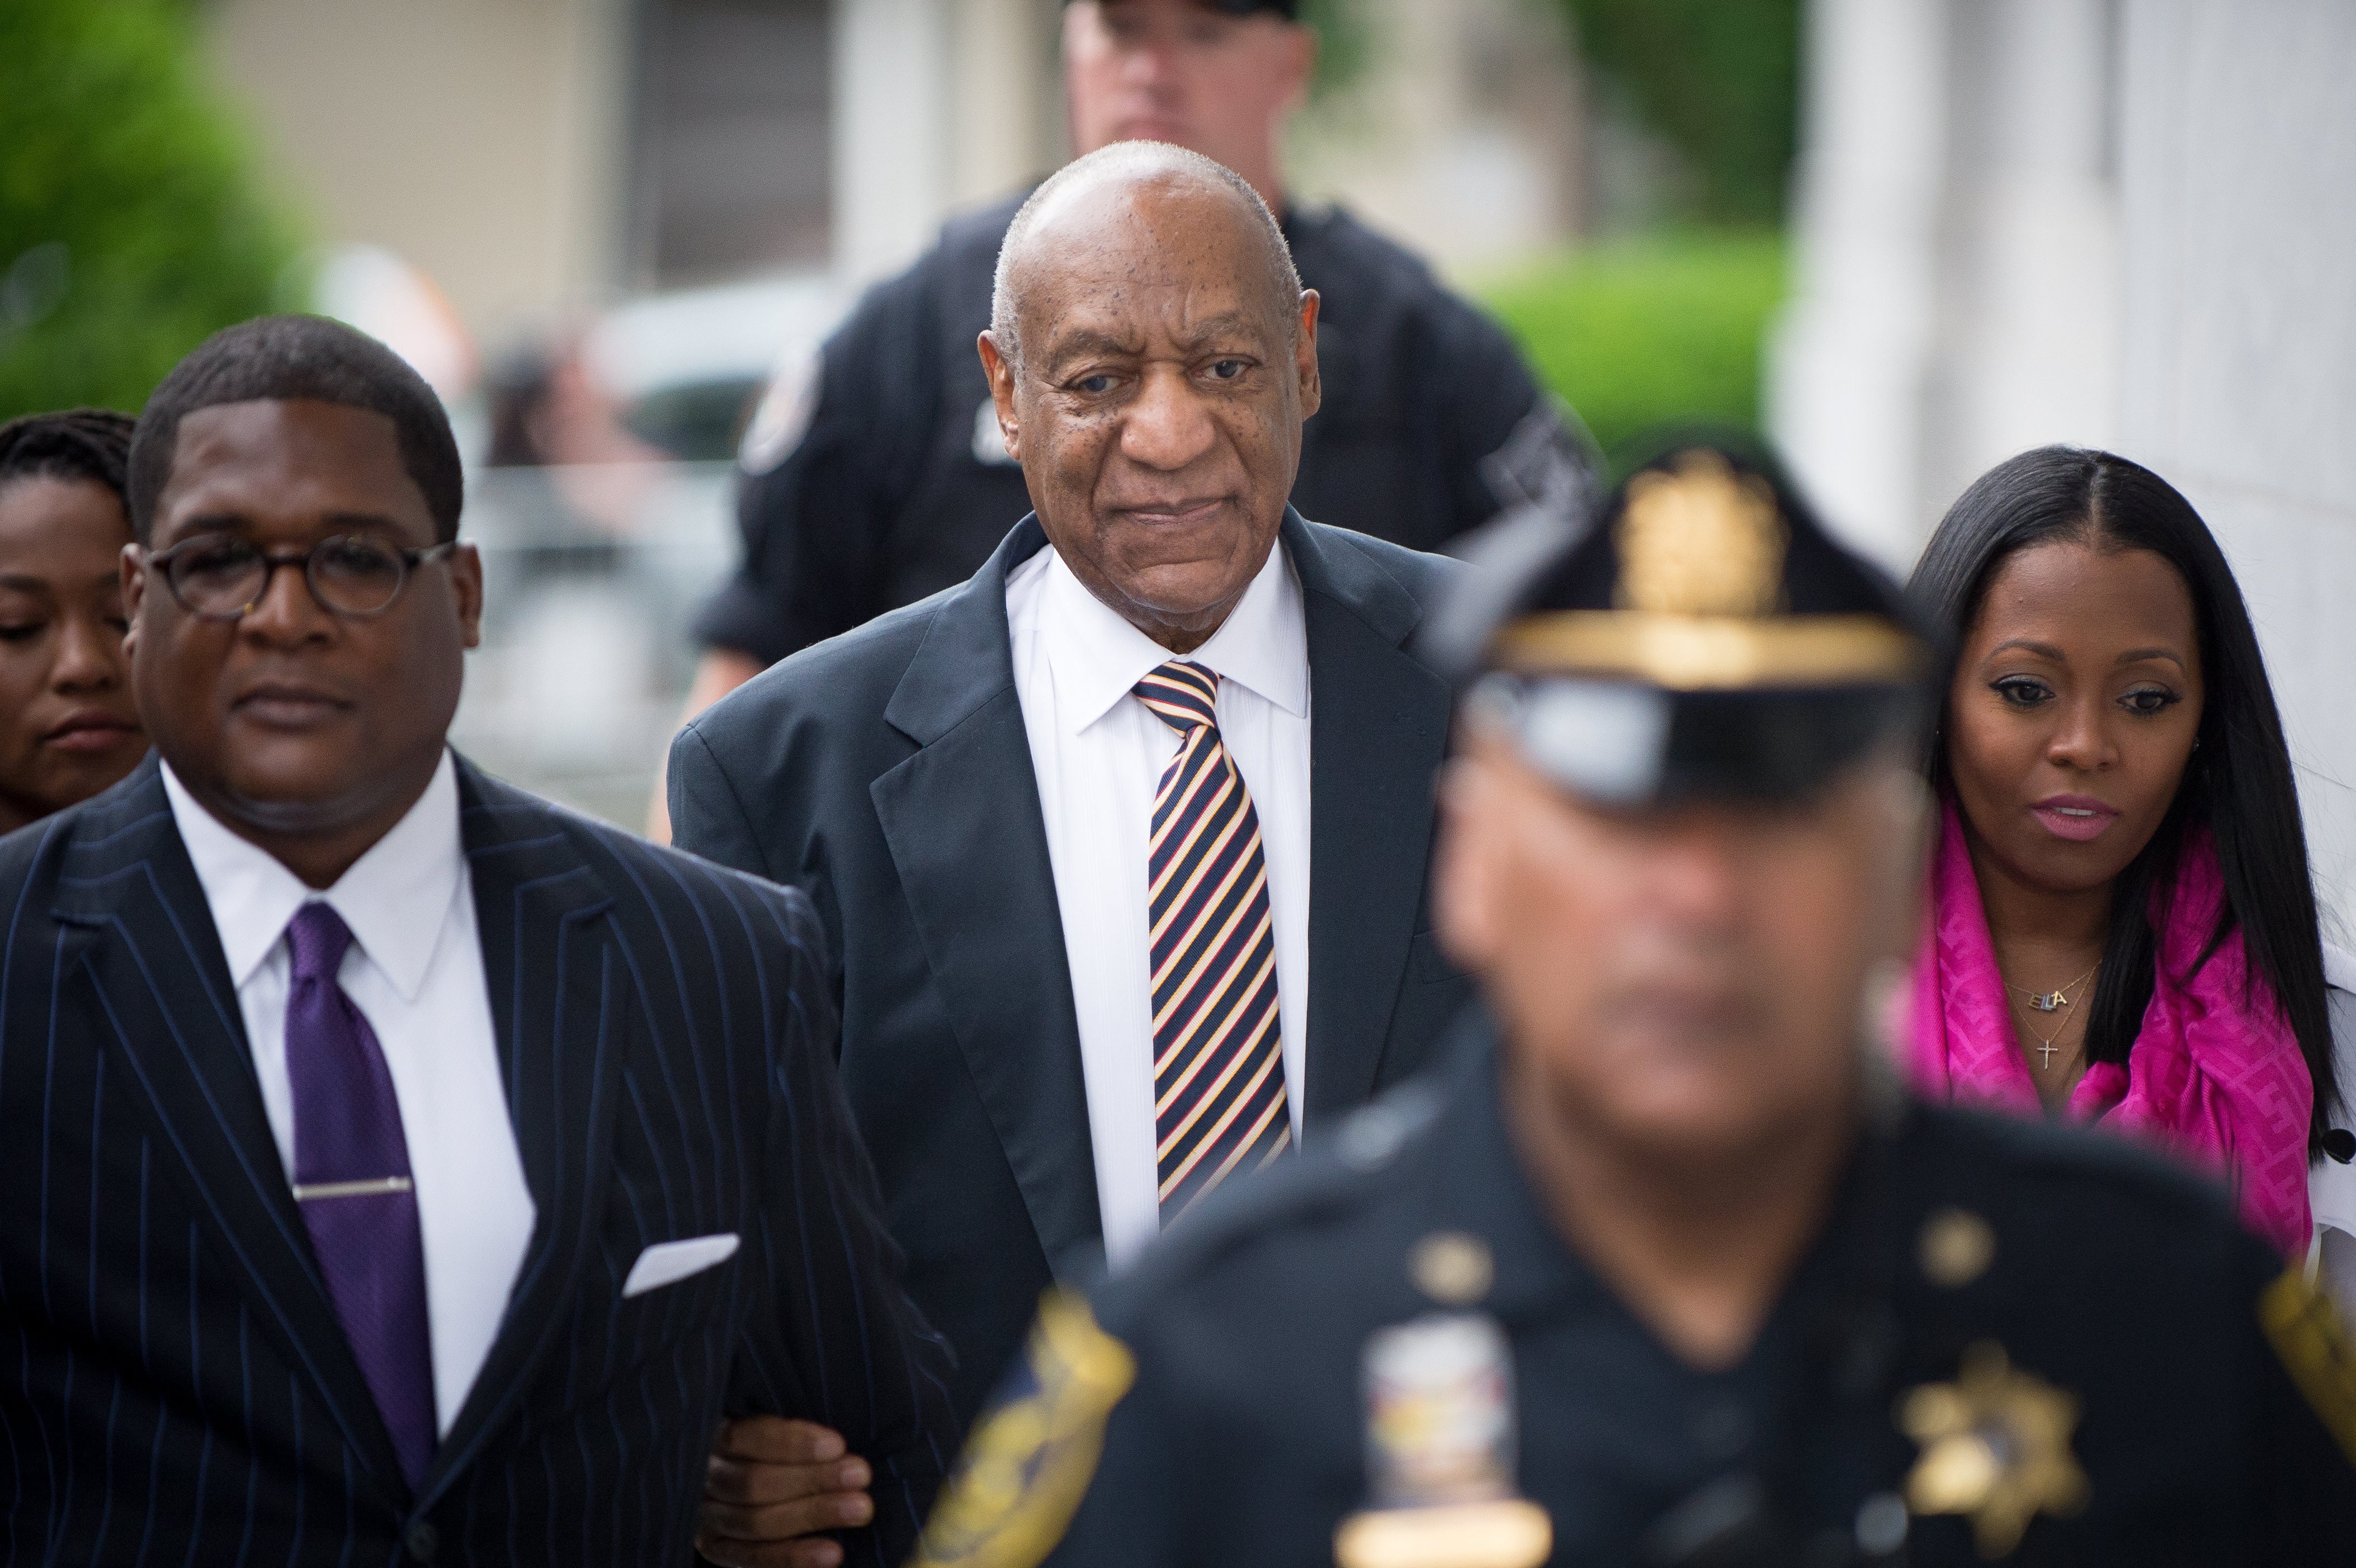 Bill Cosby’s accusers are already under attack at his trial